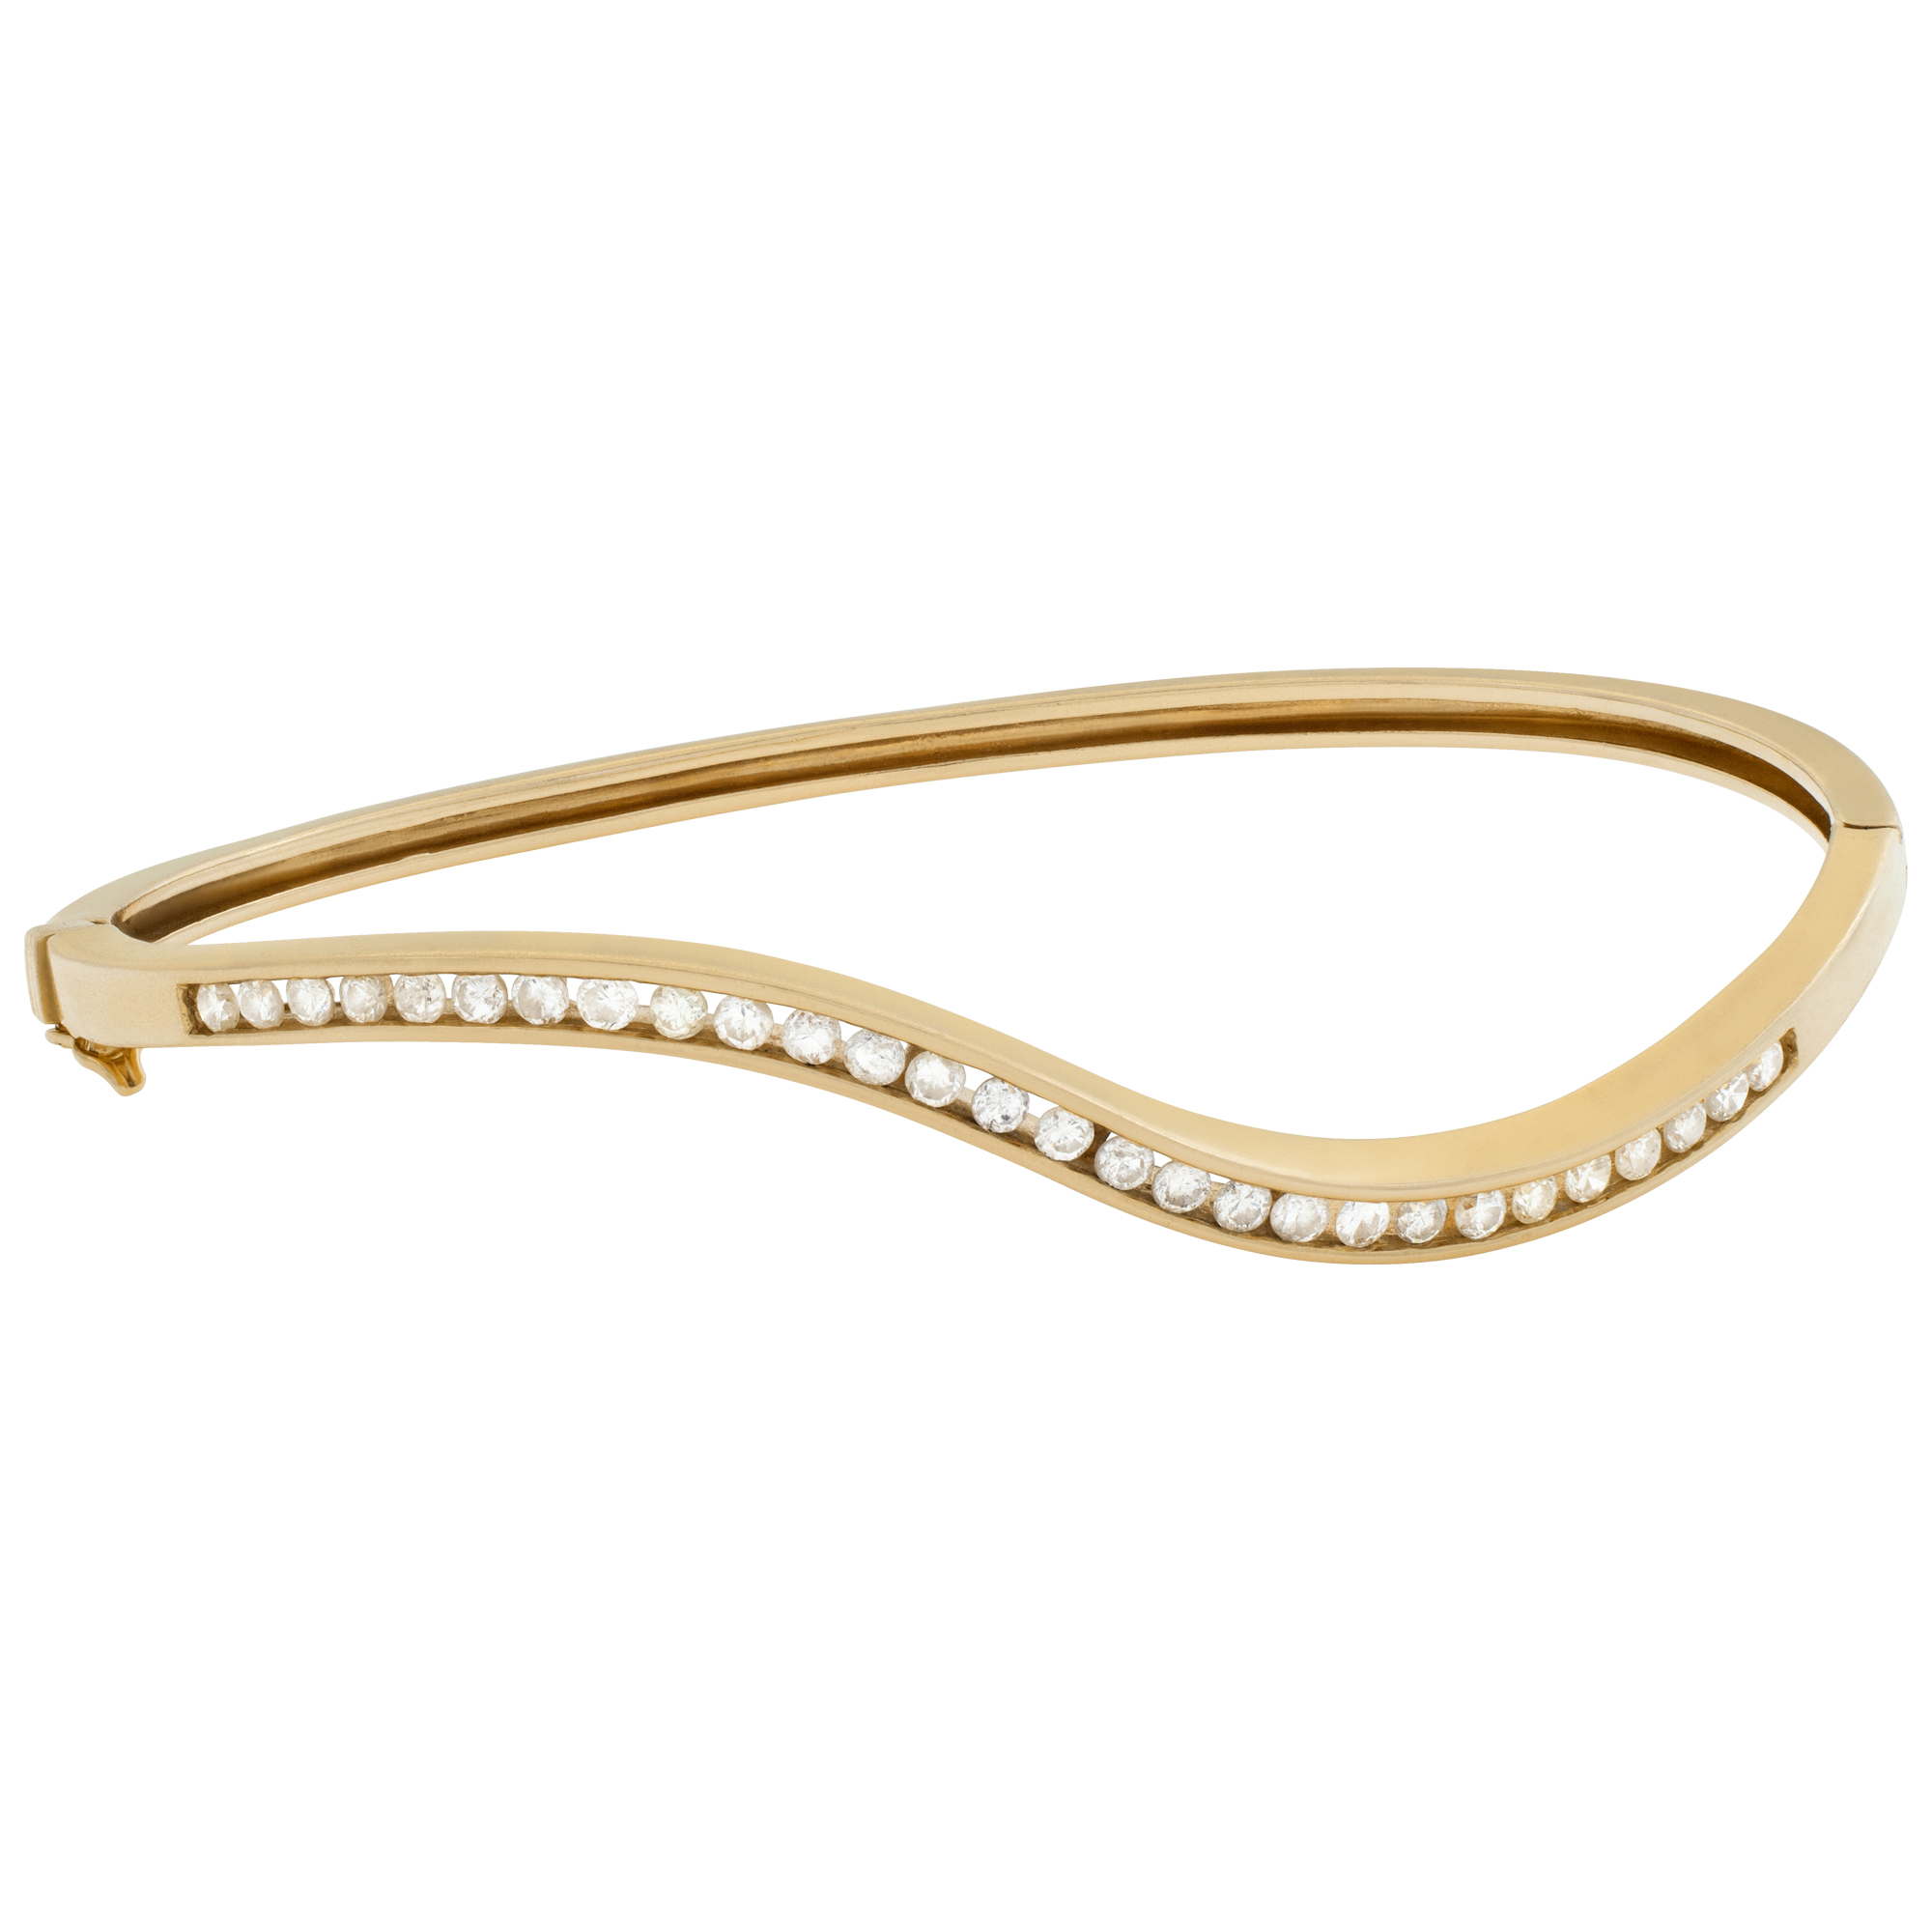 Waved 14k gold bangle with overt 1 carat in G-H color, Si clarity diamonds